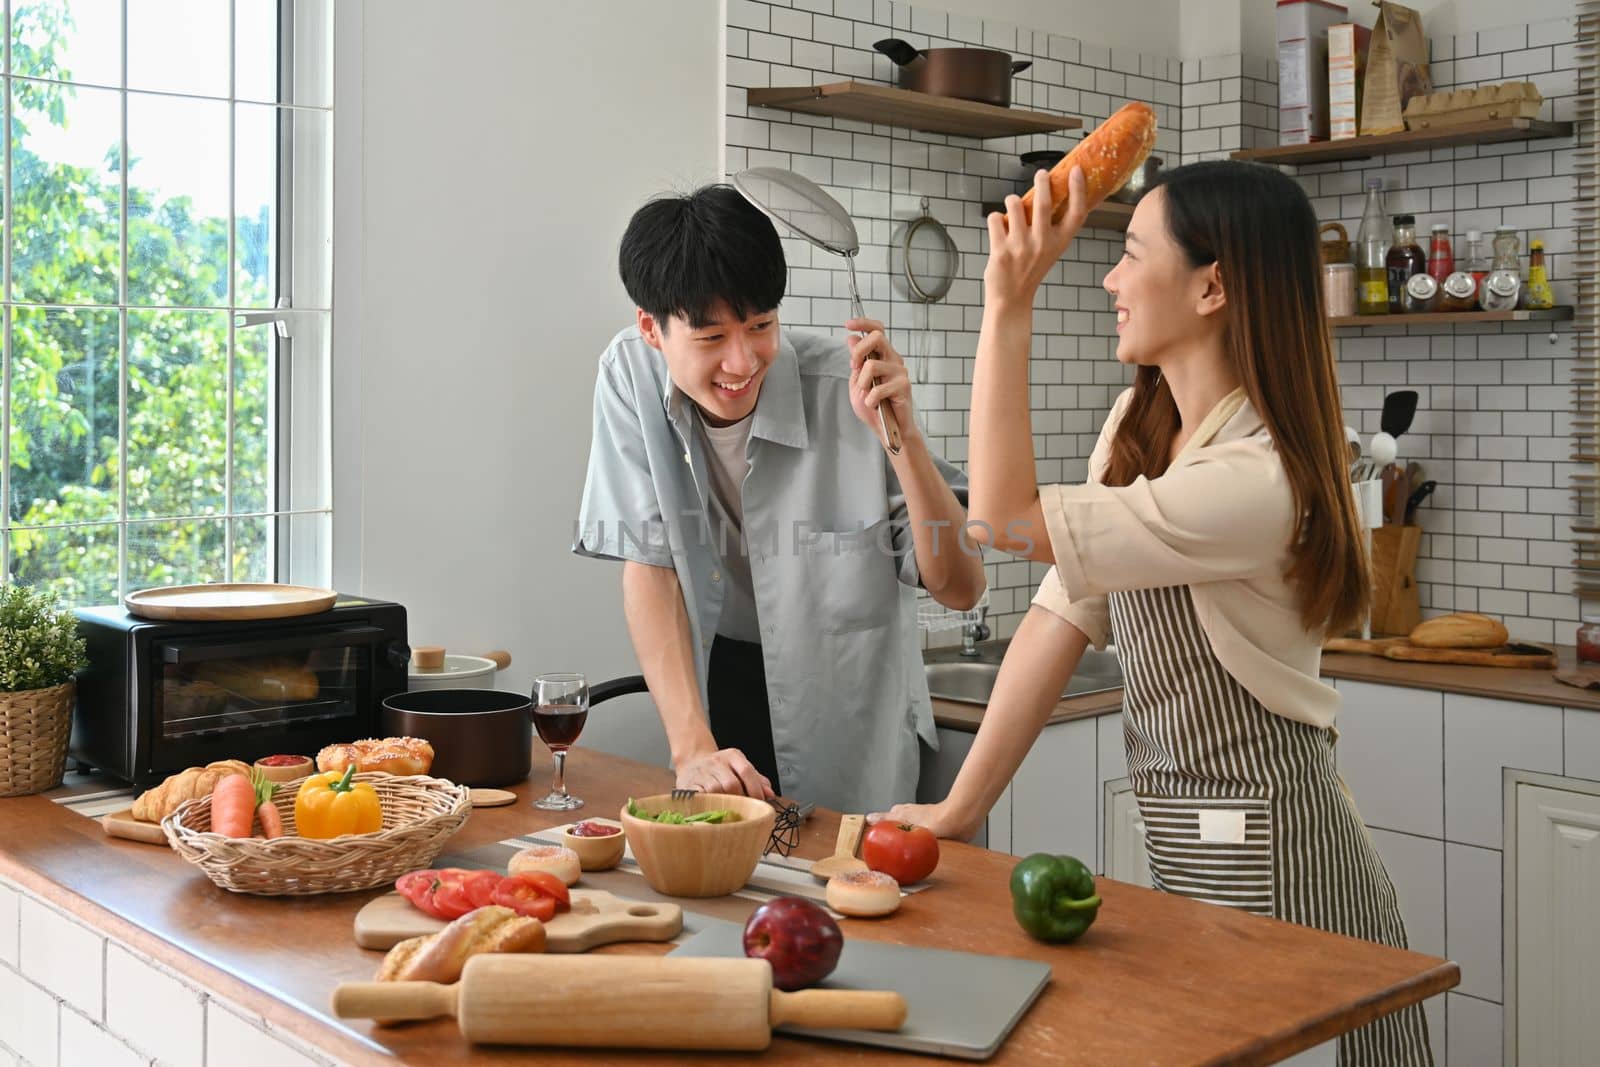 Playful young couple pretending fight with utensils tools while cooking in modern kitchen together.